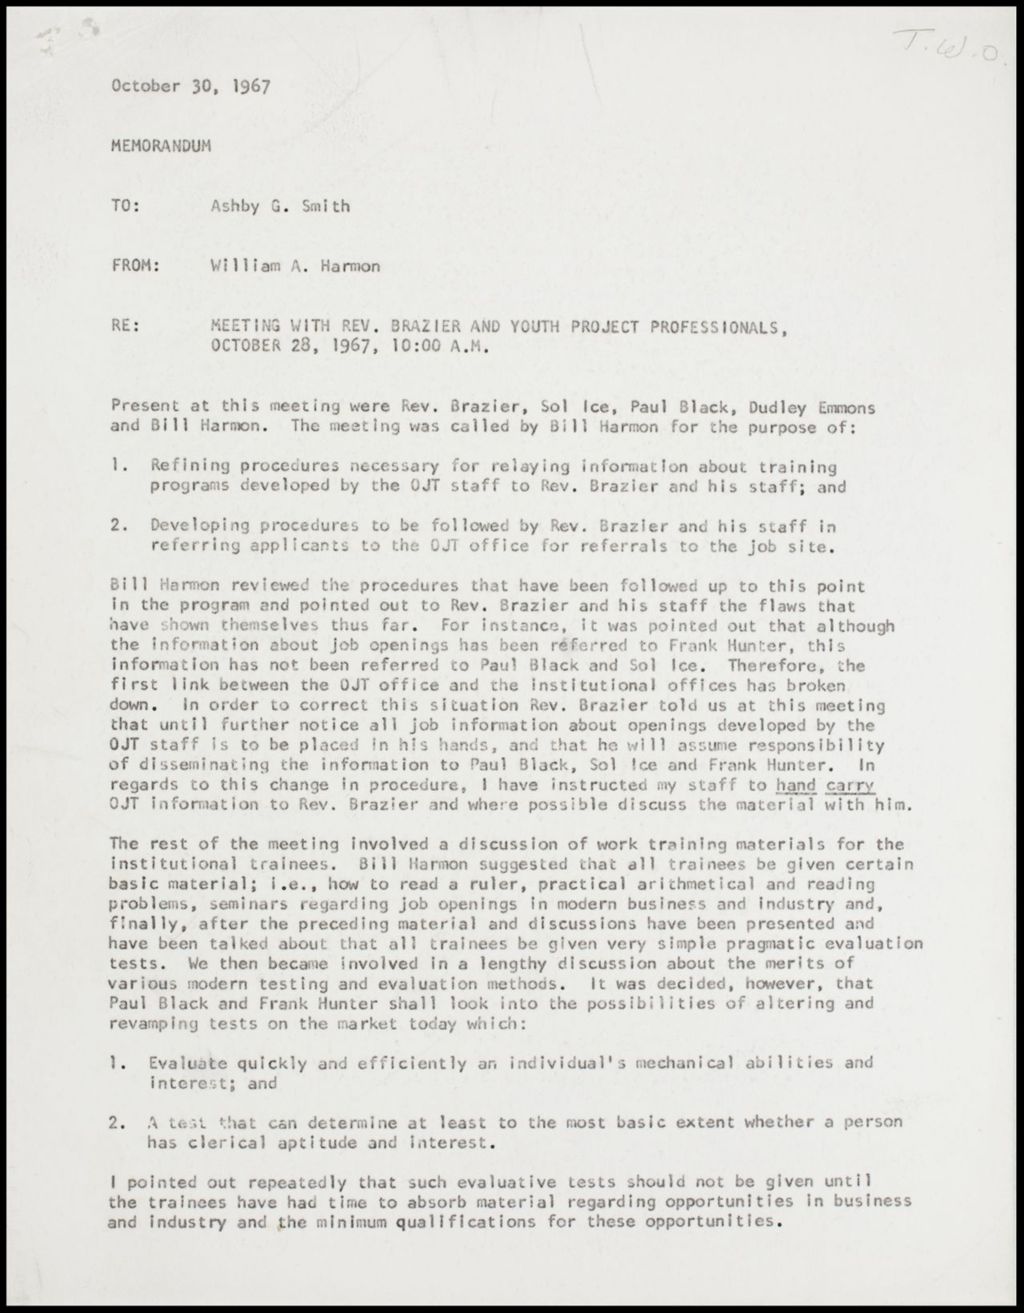 TWO - Suggestions for Procedures, 1967 (Folder II-96)